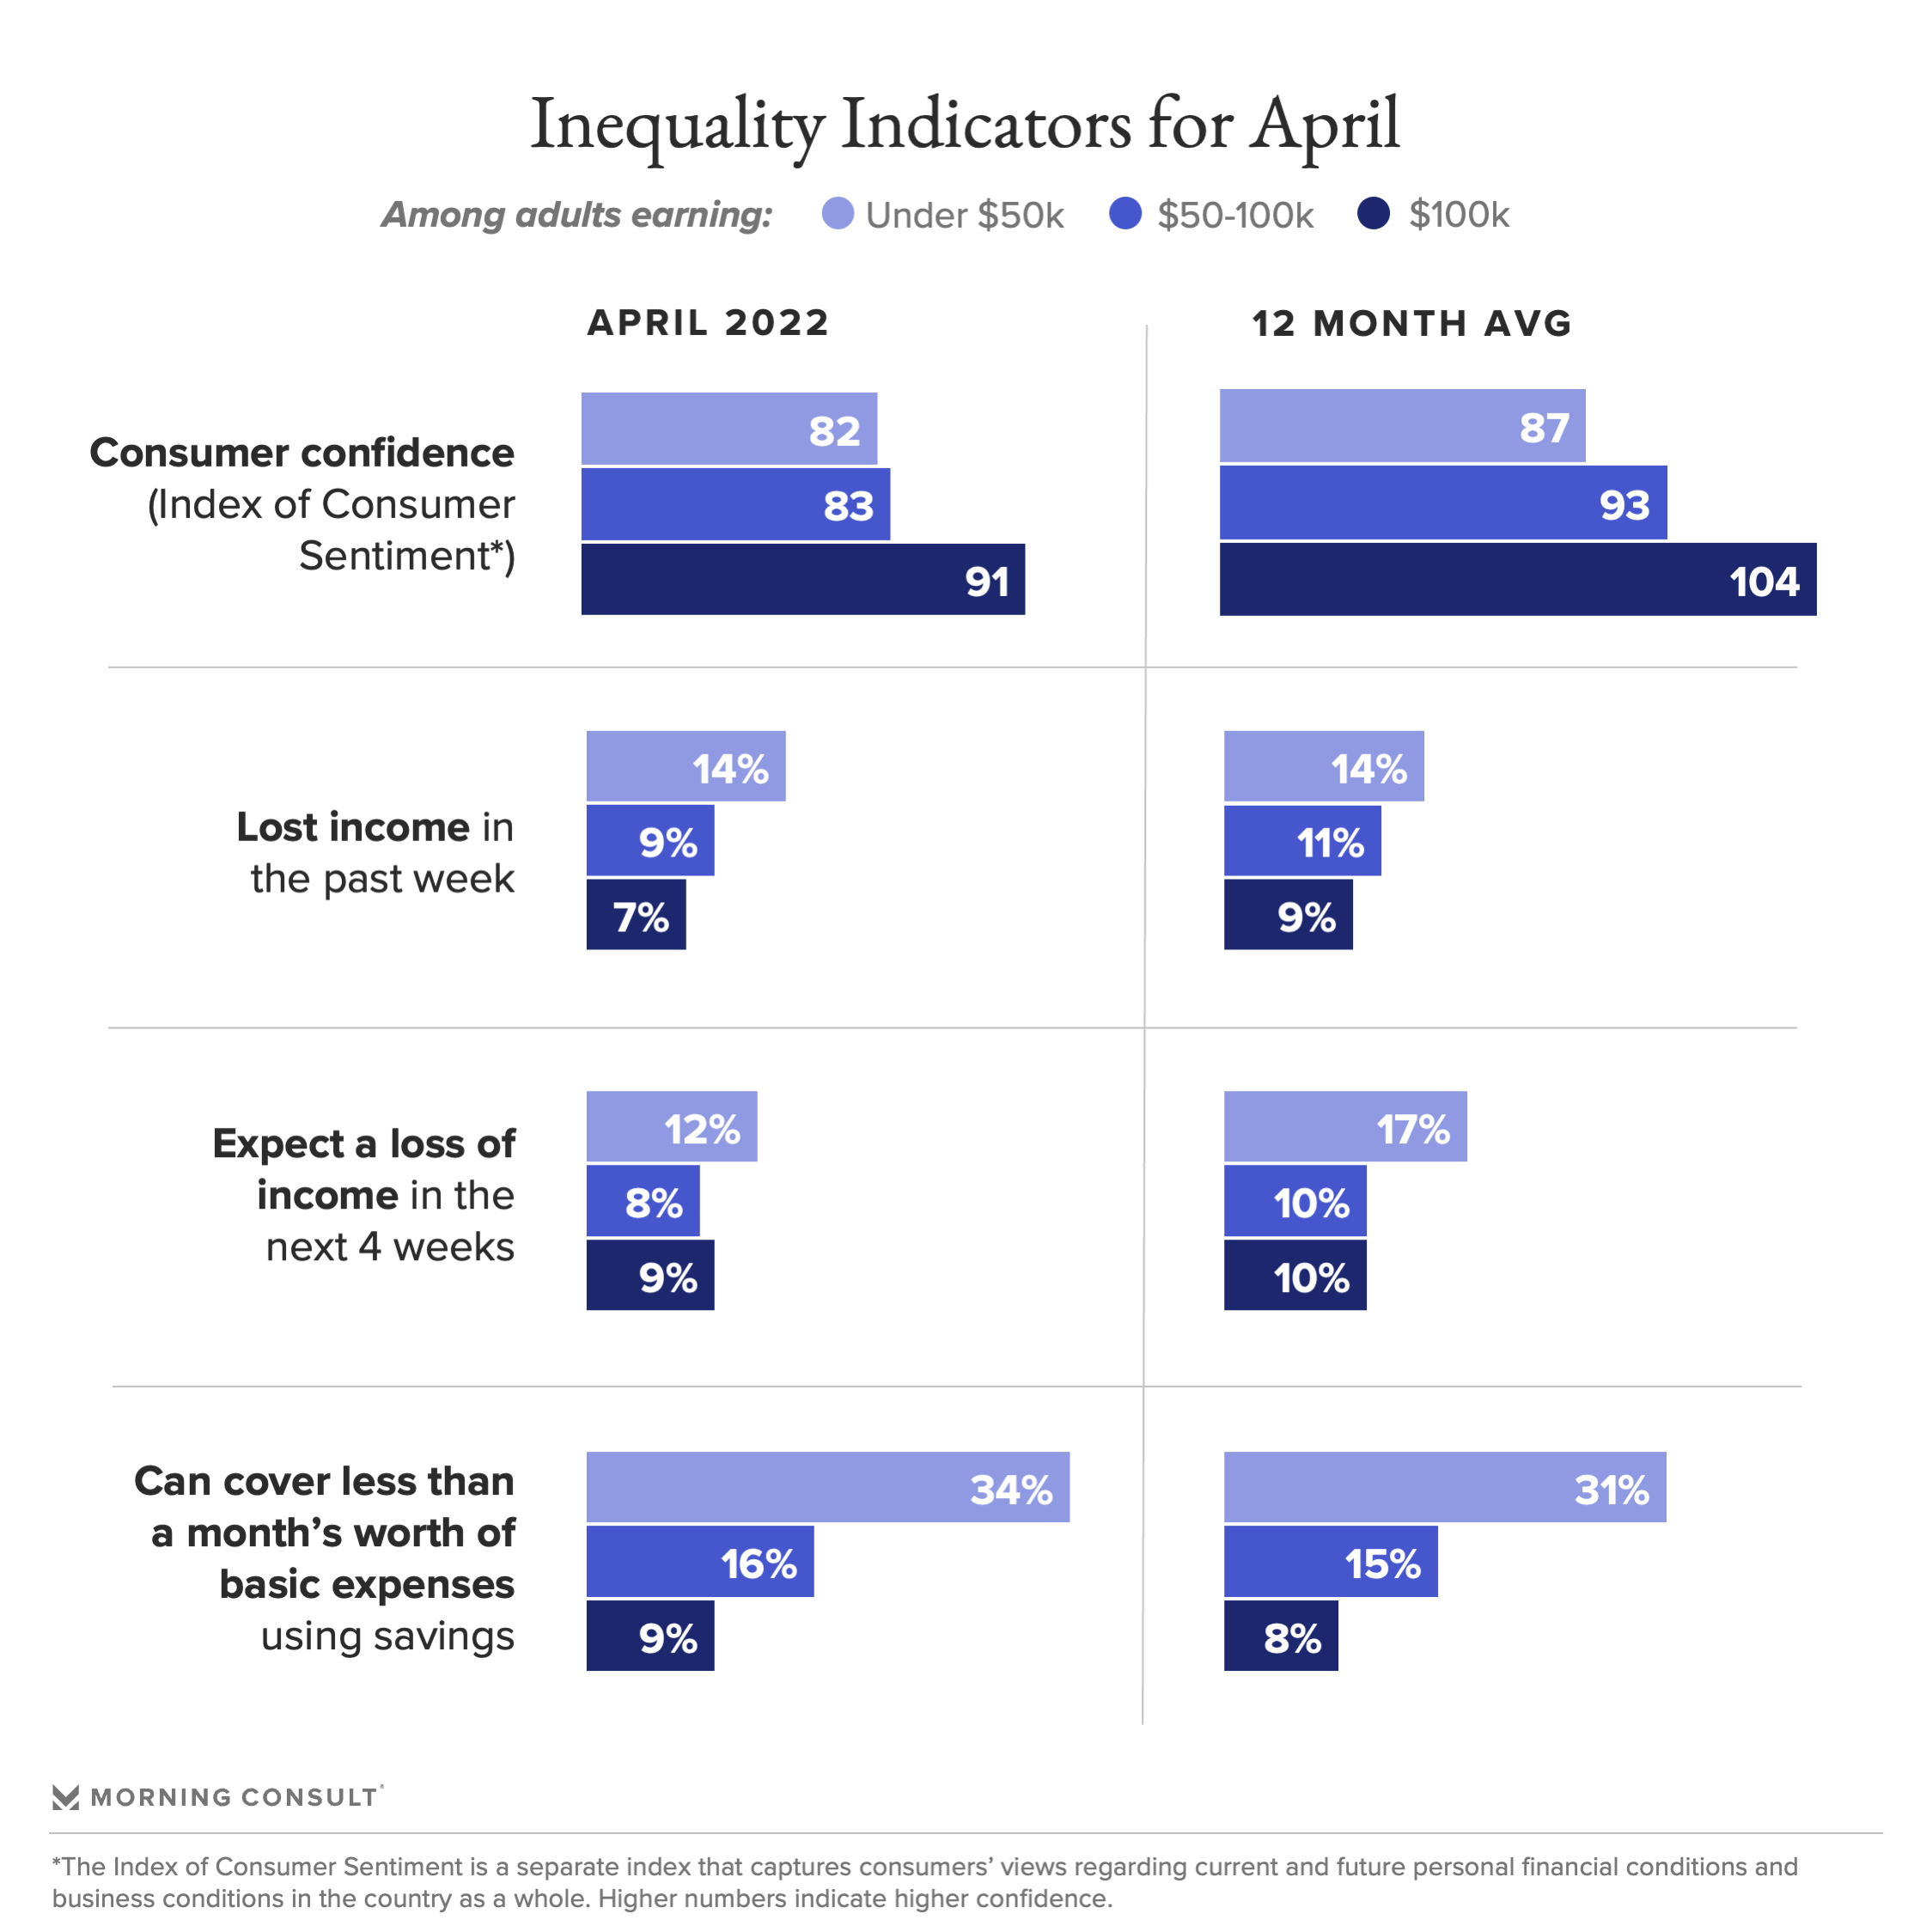 Charts depicting income inequality indicators in the U.S. for April 2022 by income